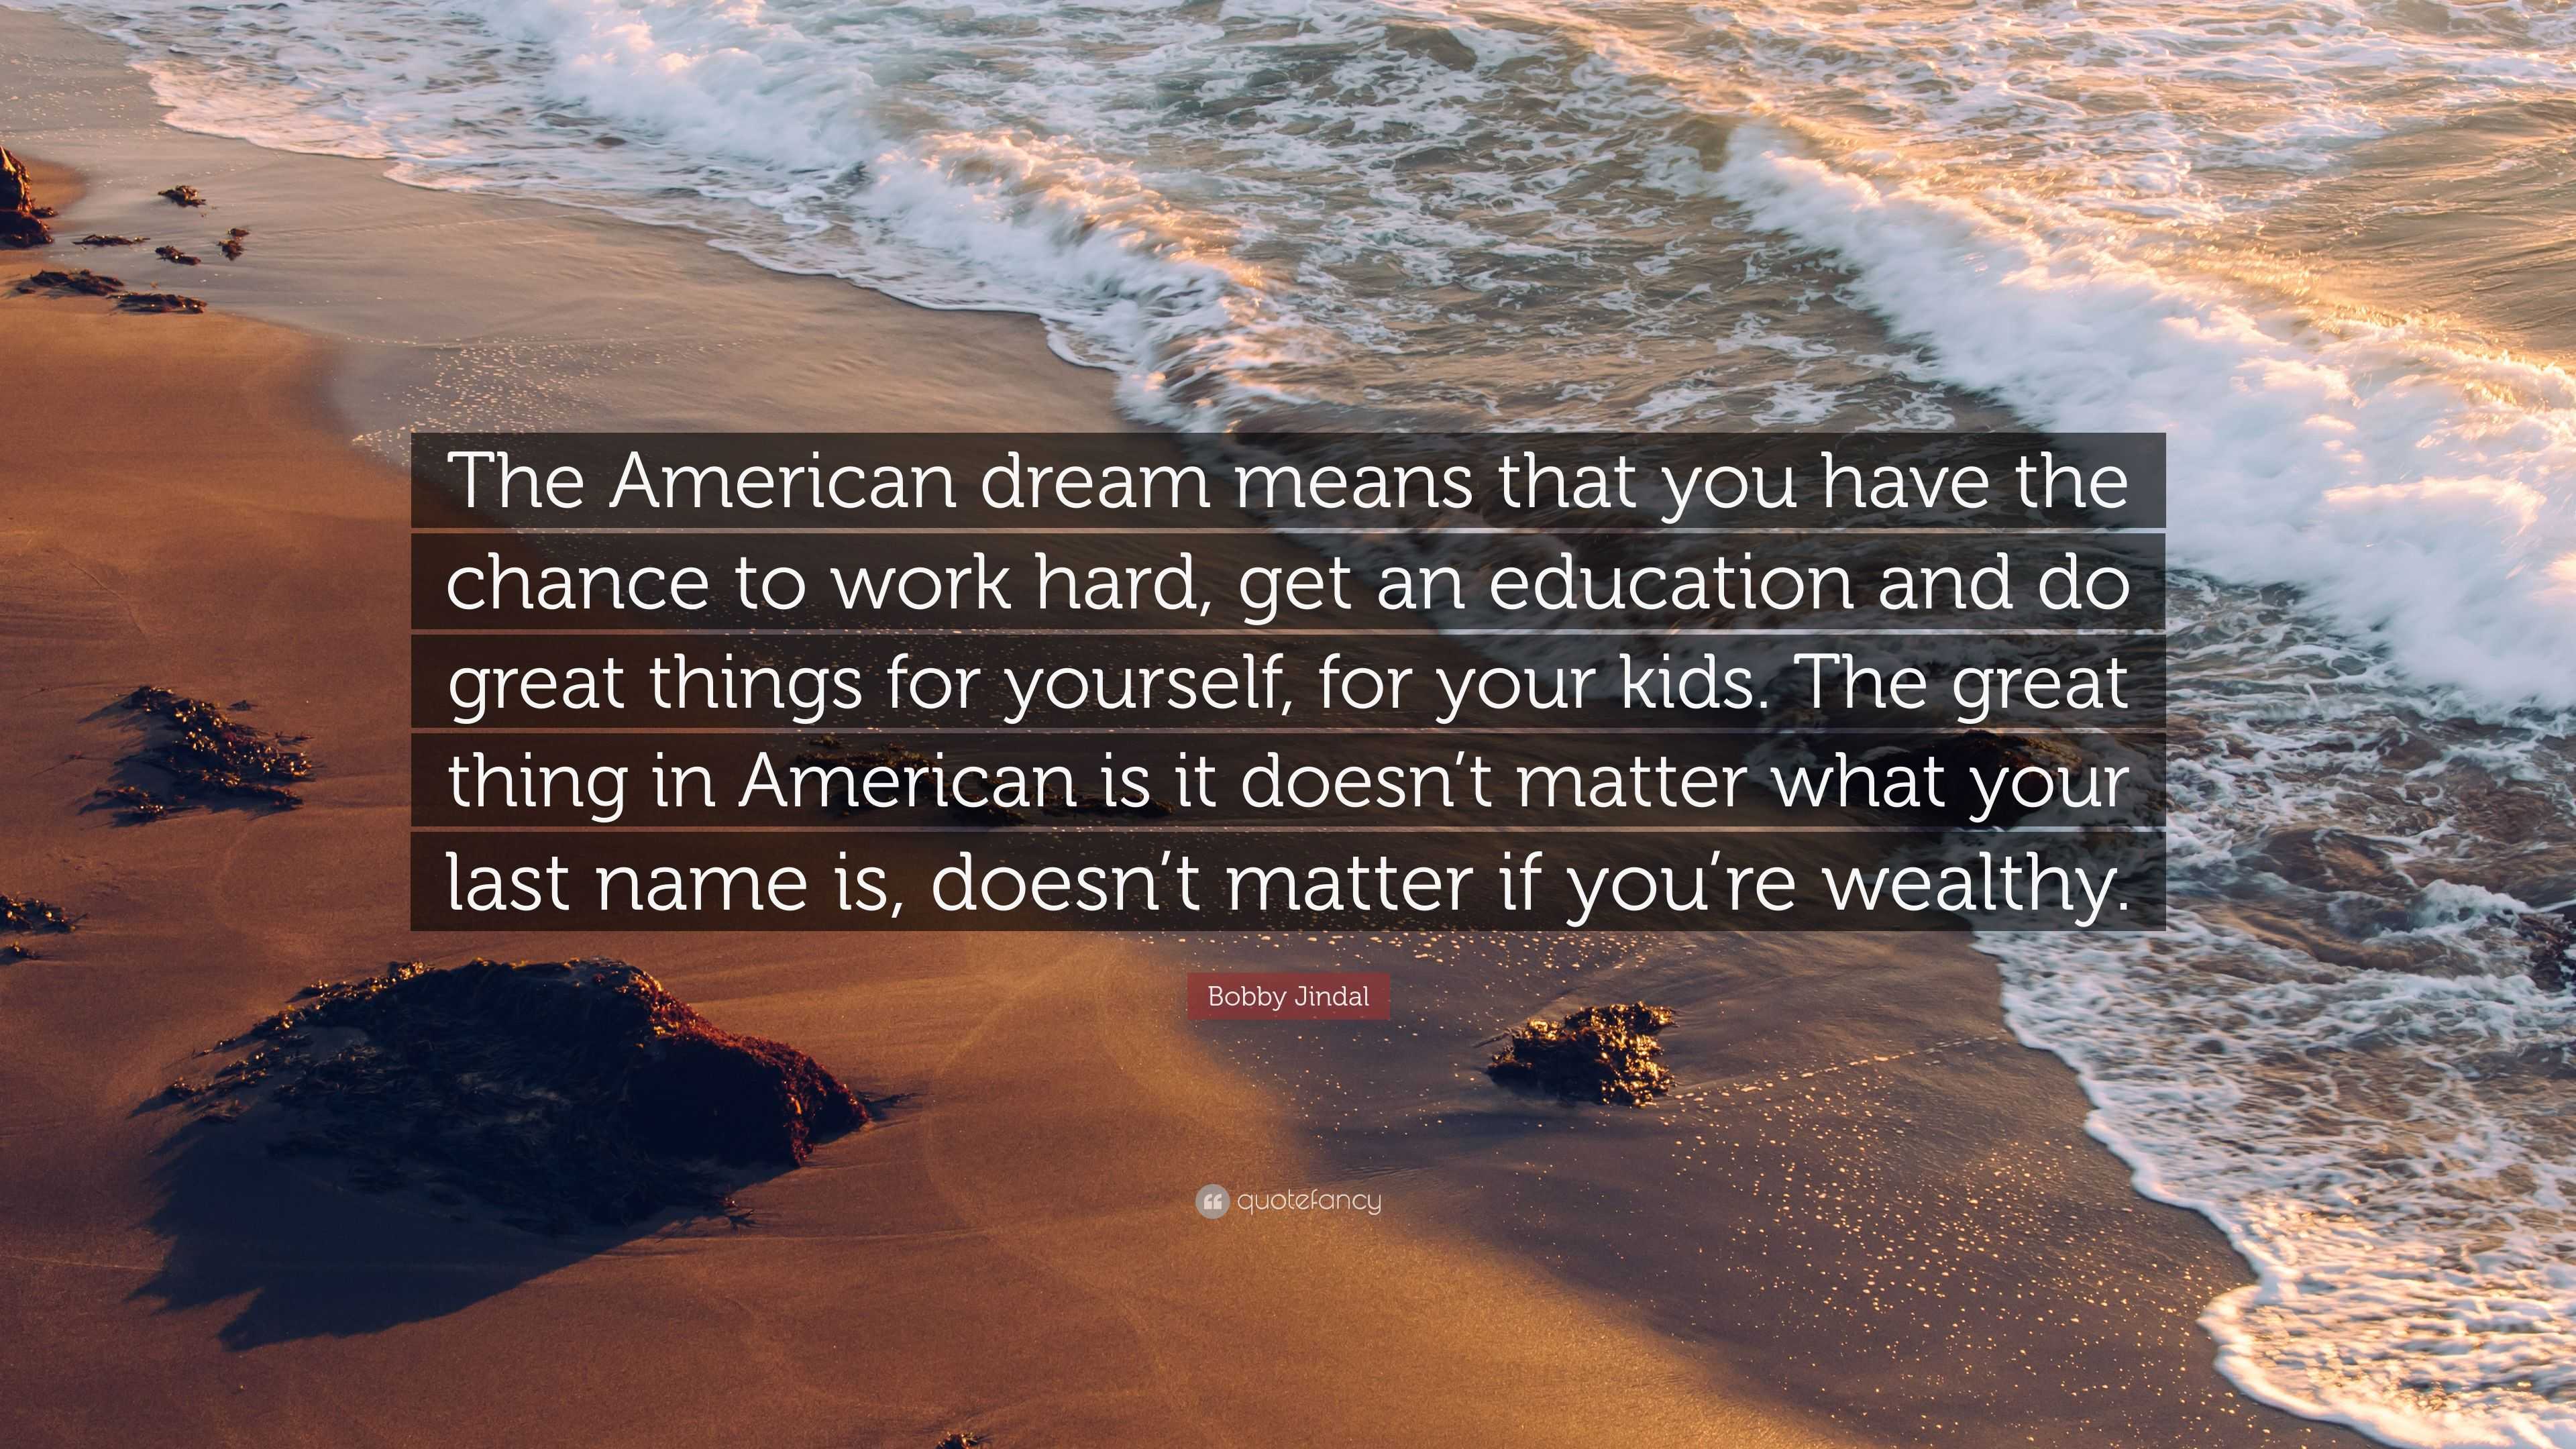 Bobby Jindal Quote: “The American dream means that you have the chance ...
